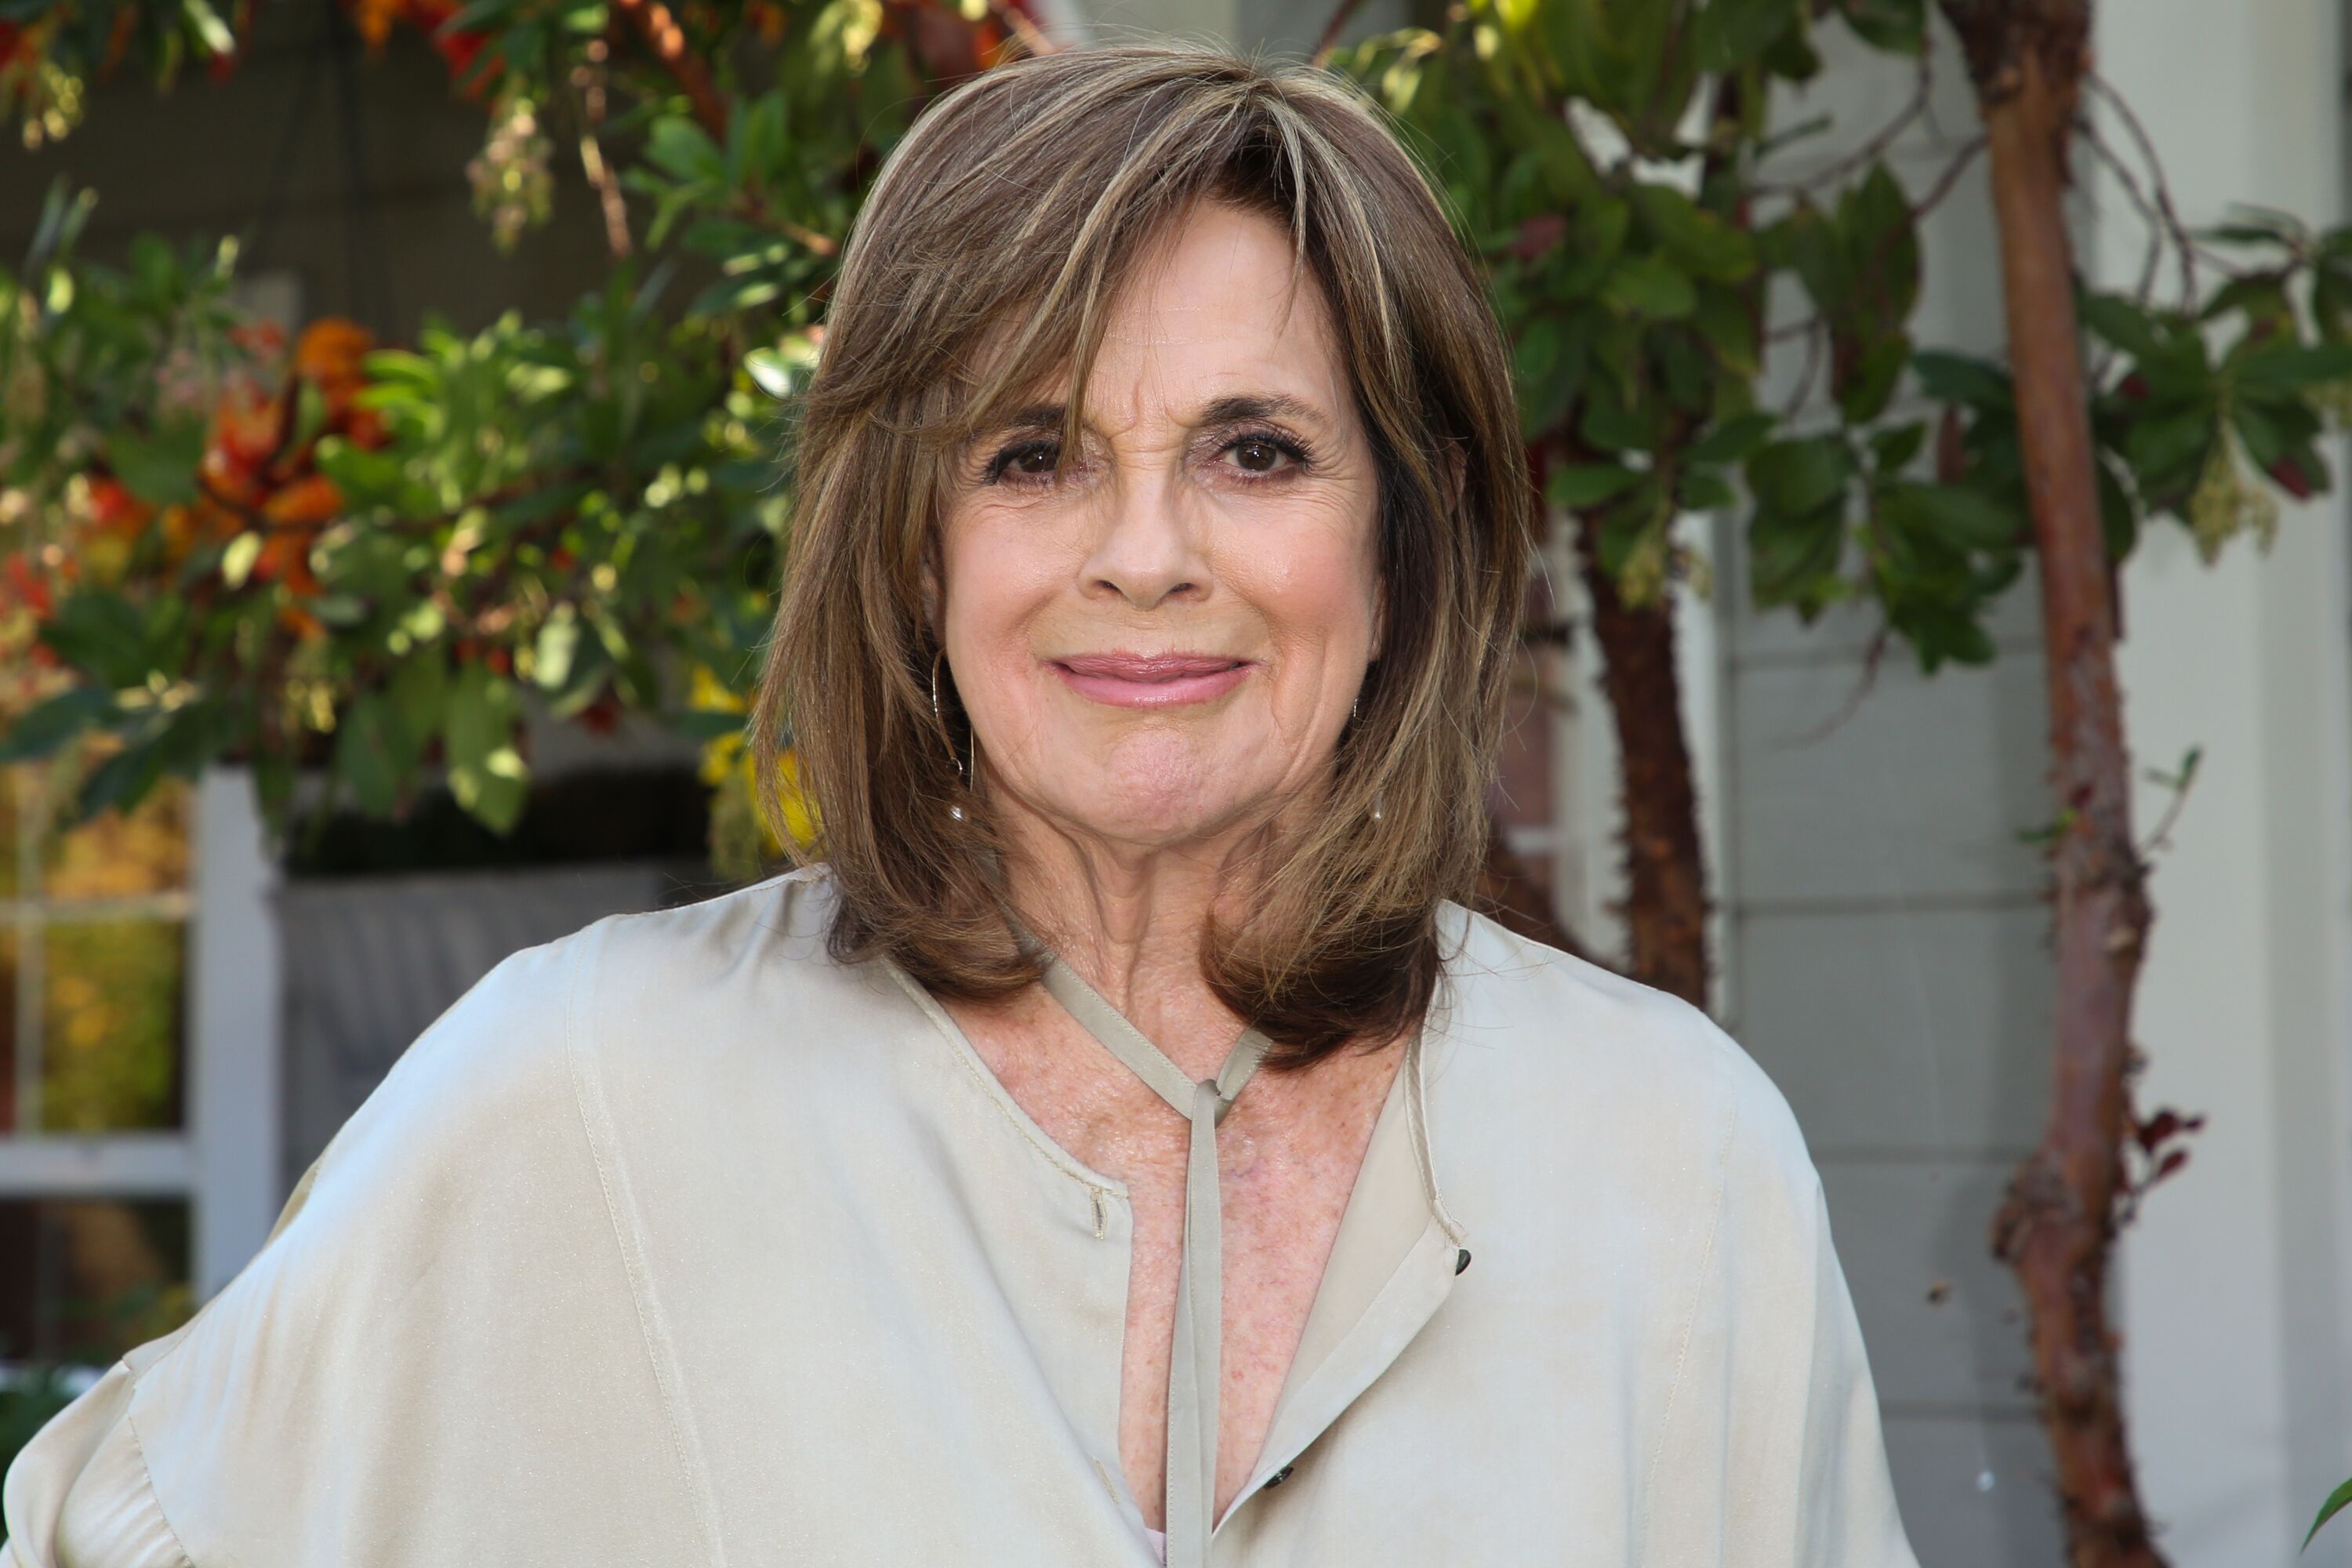 Actress Linda Gray visits Hallmark's "Home & Family" at Universal Studios Hollywood on October 22, 2018 in Universal City, California | Photo: Getty Images